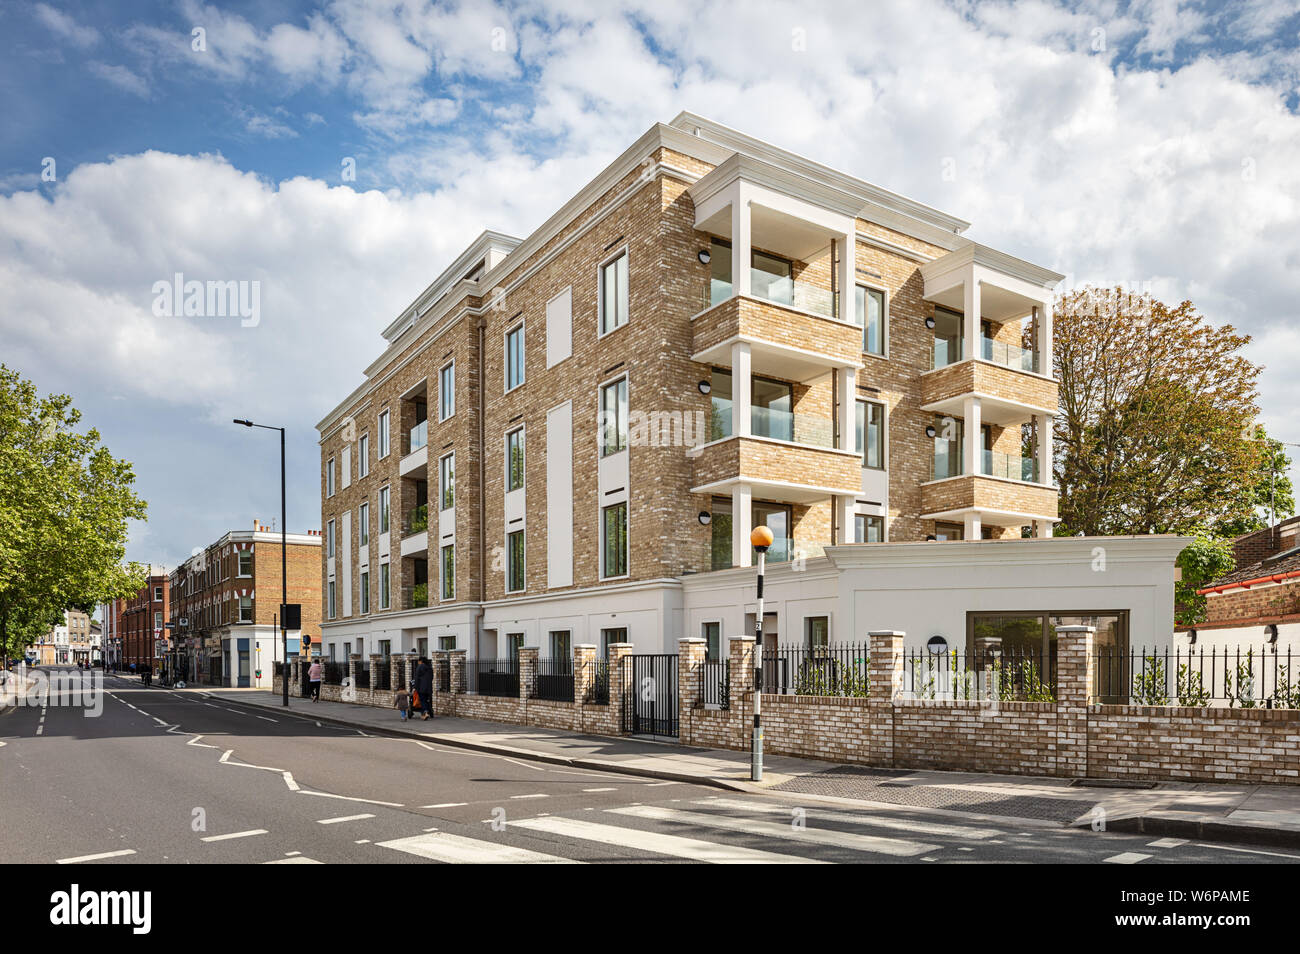 Mackenzie Trench House in Lillie Road, Fulham, London Stock Photo